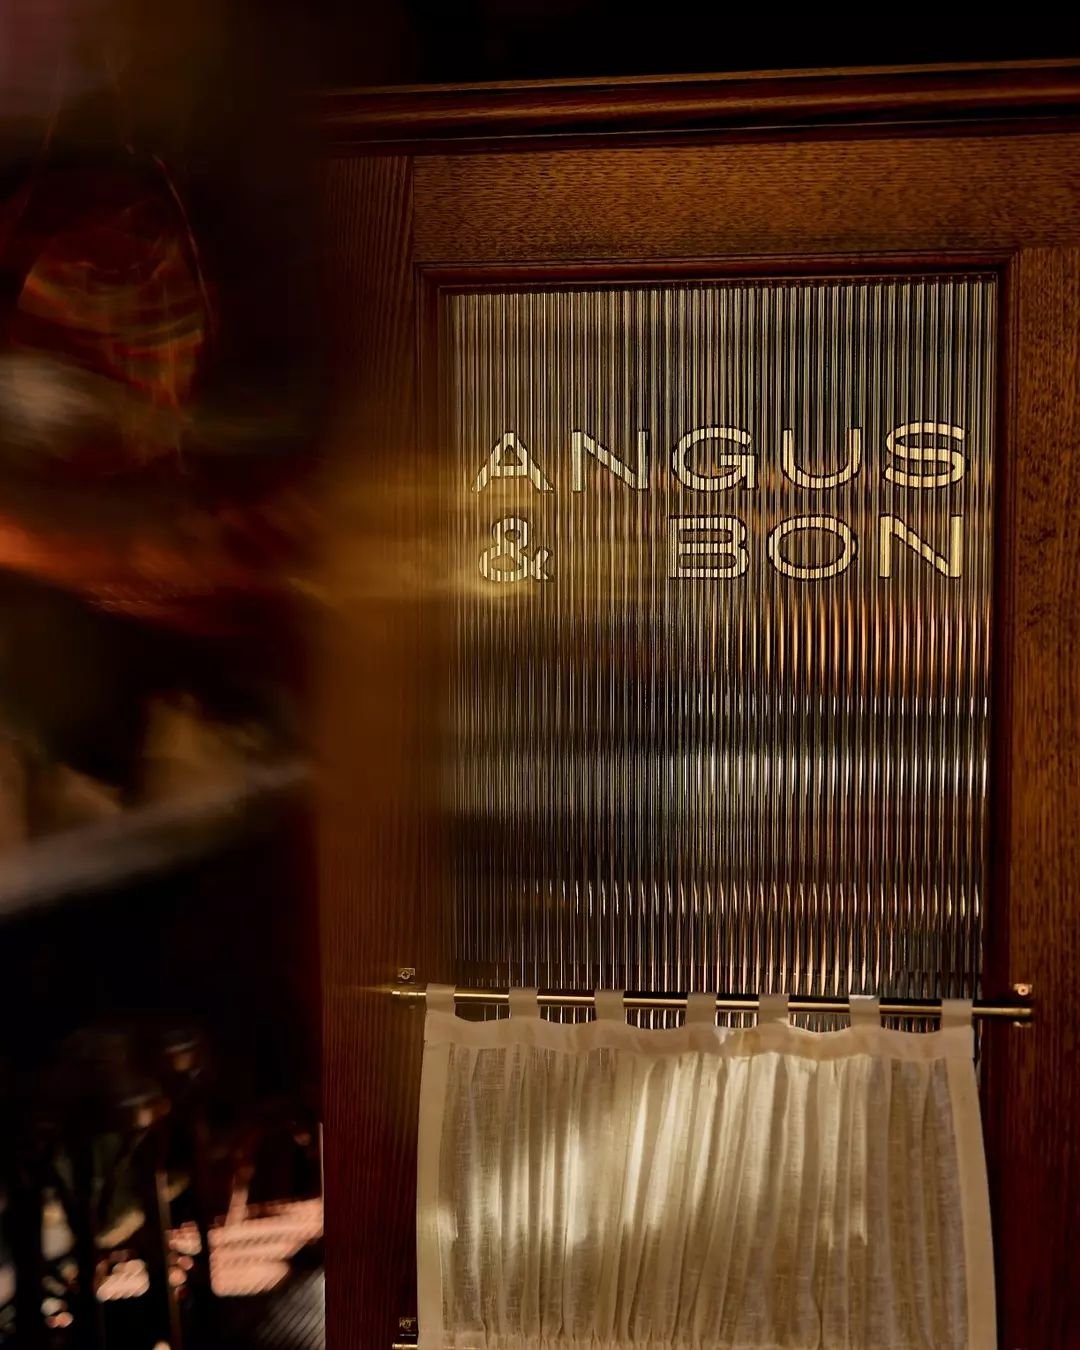 Treat mum to an incredible 3-course lunch or dinner at Angus &amp; Bon this Mother's Day. Head to the link in our bio to see the menu and make your reservation. #angusandbon